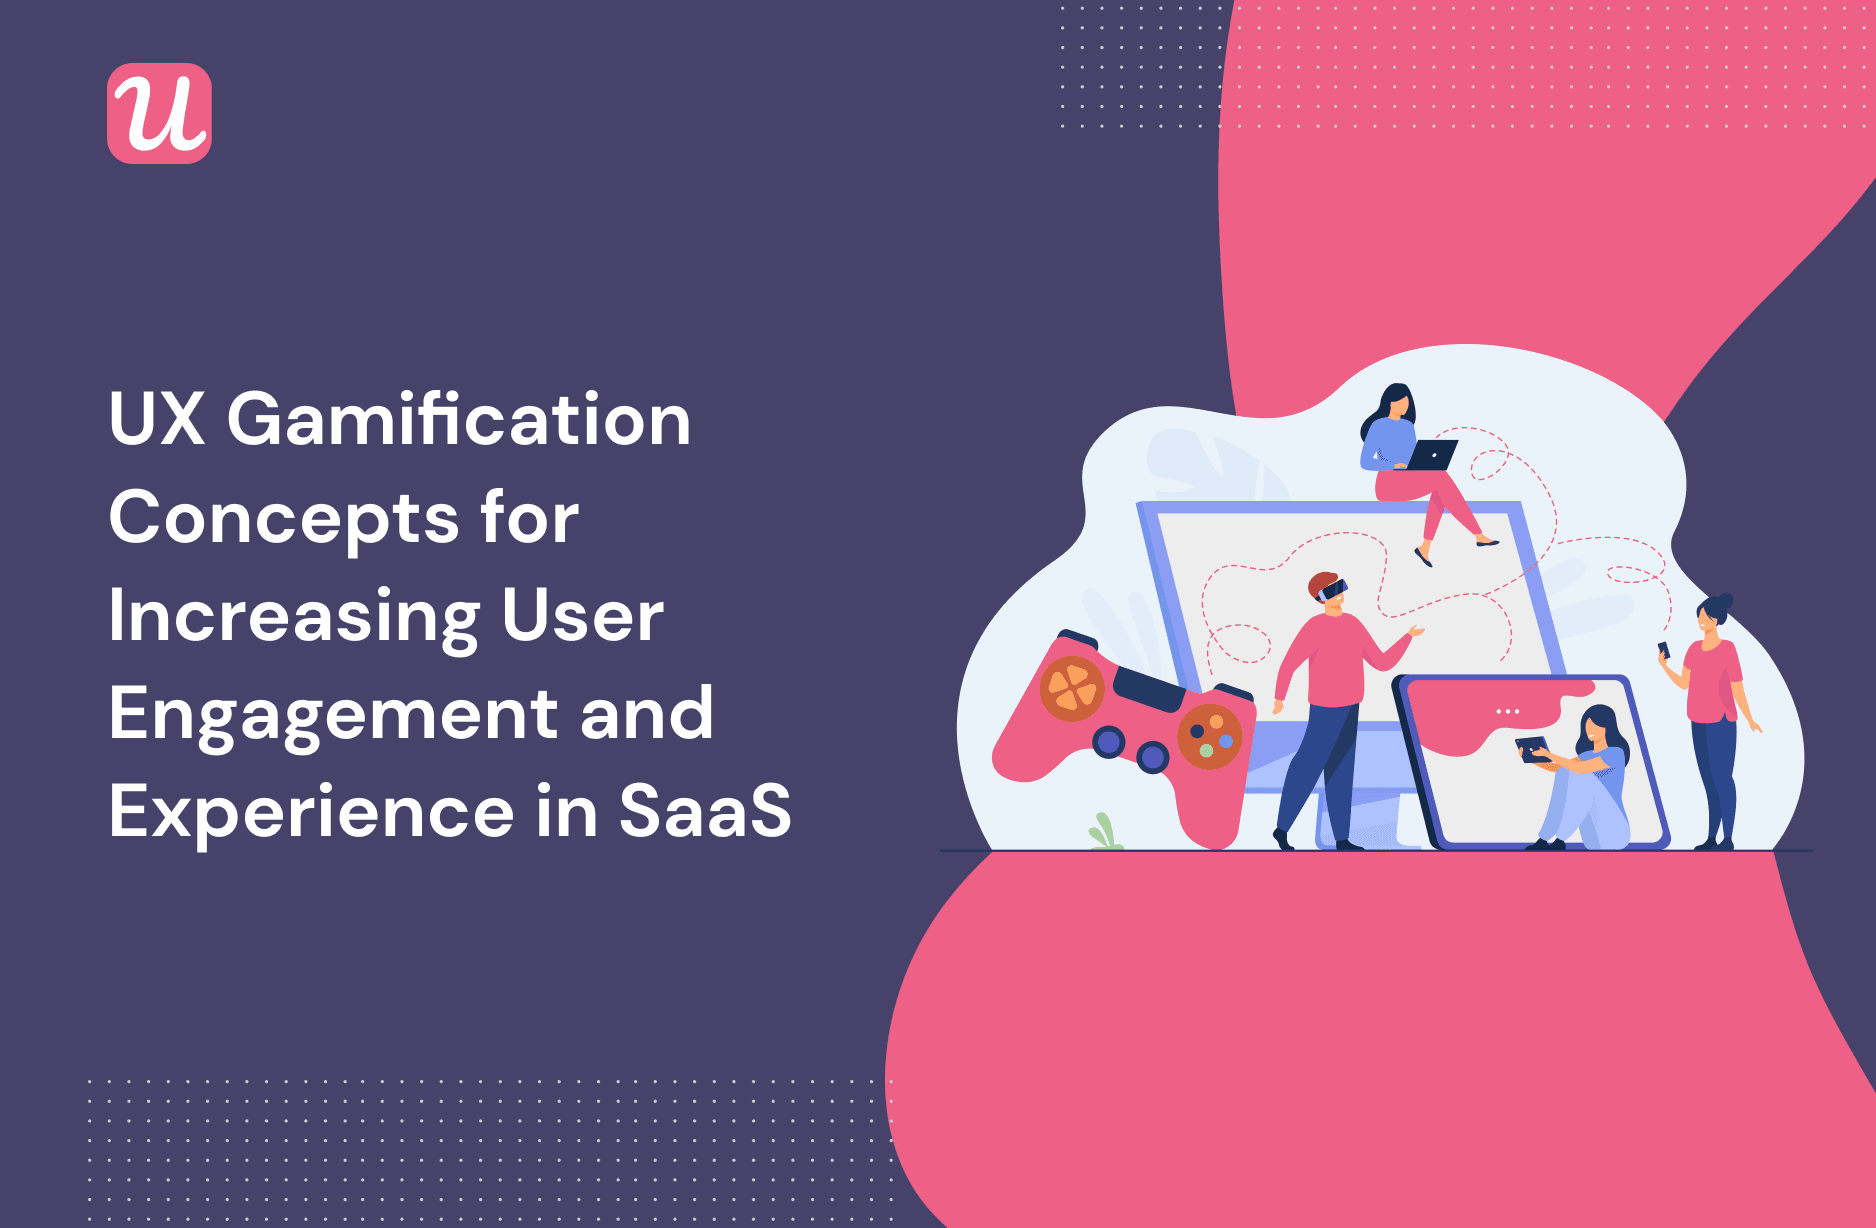 UX Gamification: Concepts For Increasing User Engagement And Experience In SaaS